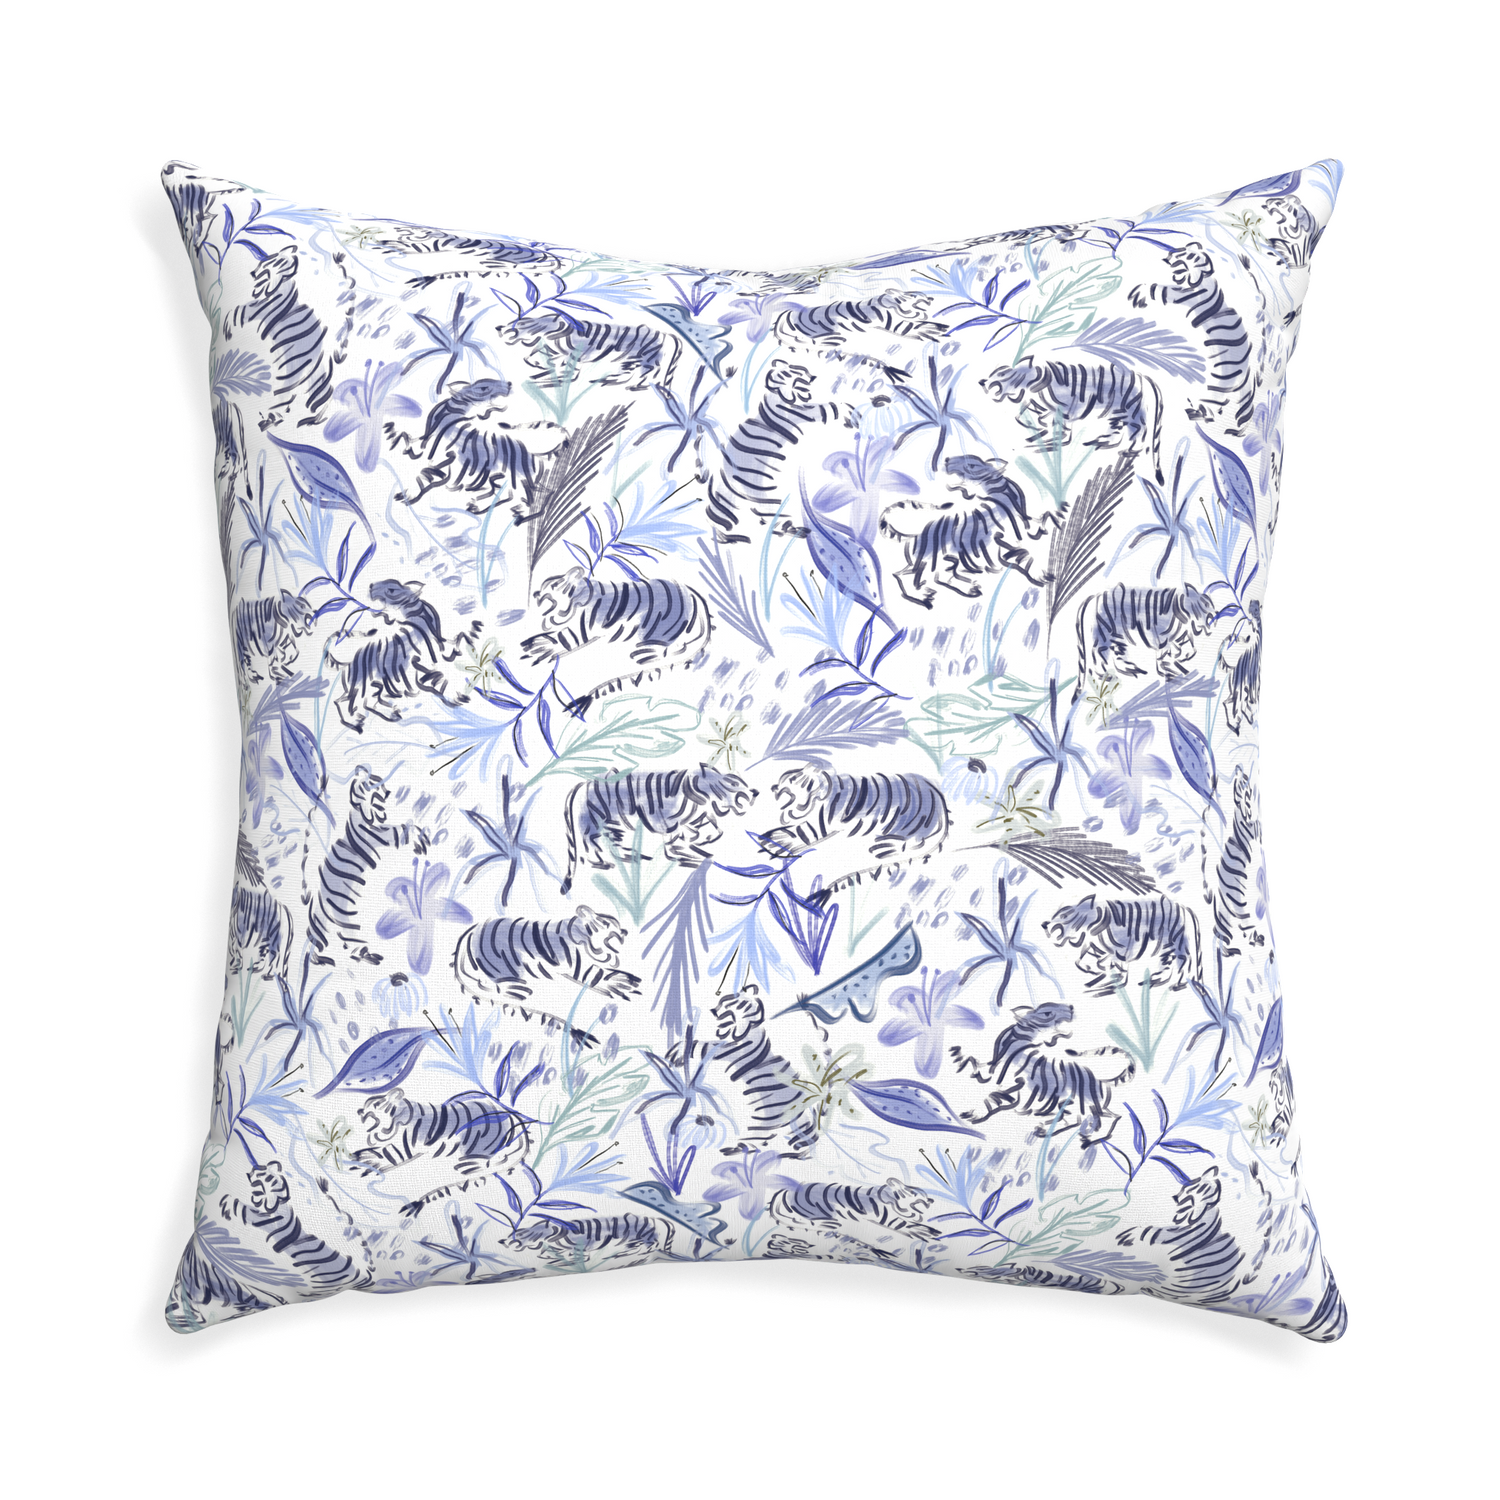 Euro-sham frida blue custom blue with intricate tiger designpillow with none on white background